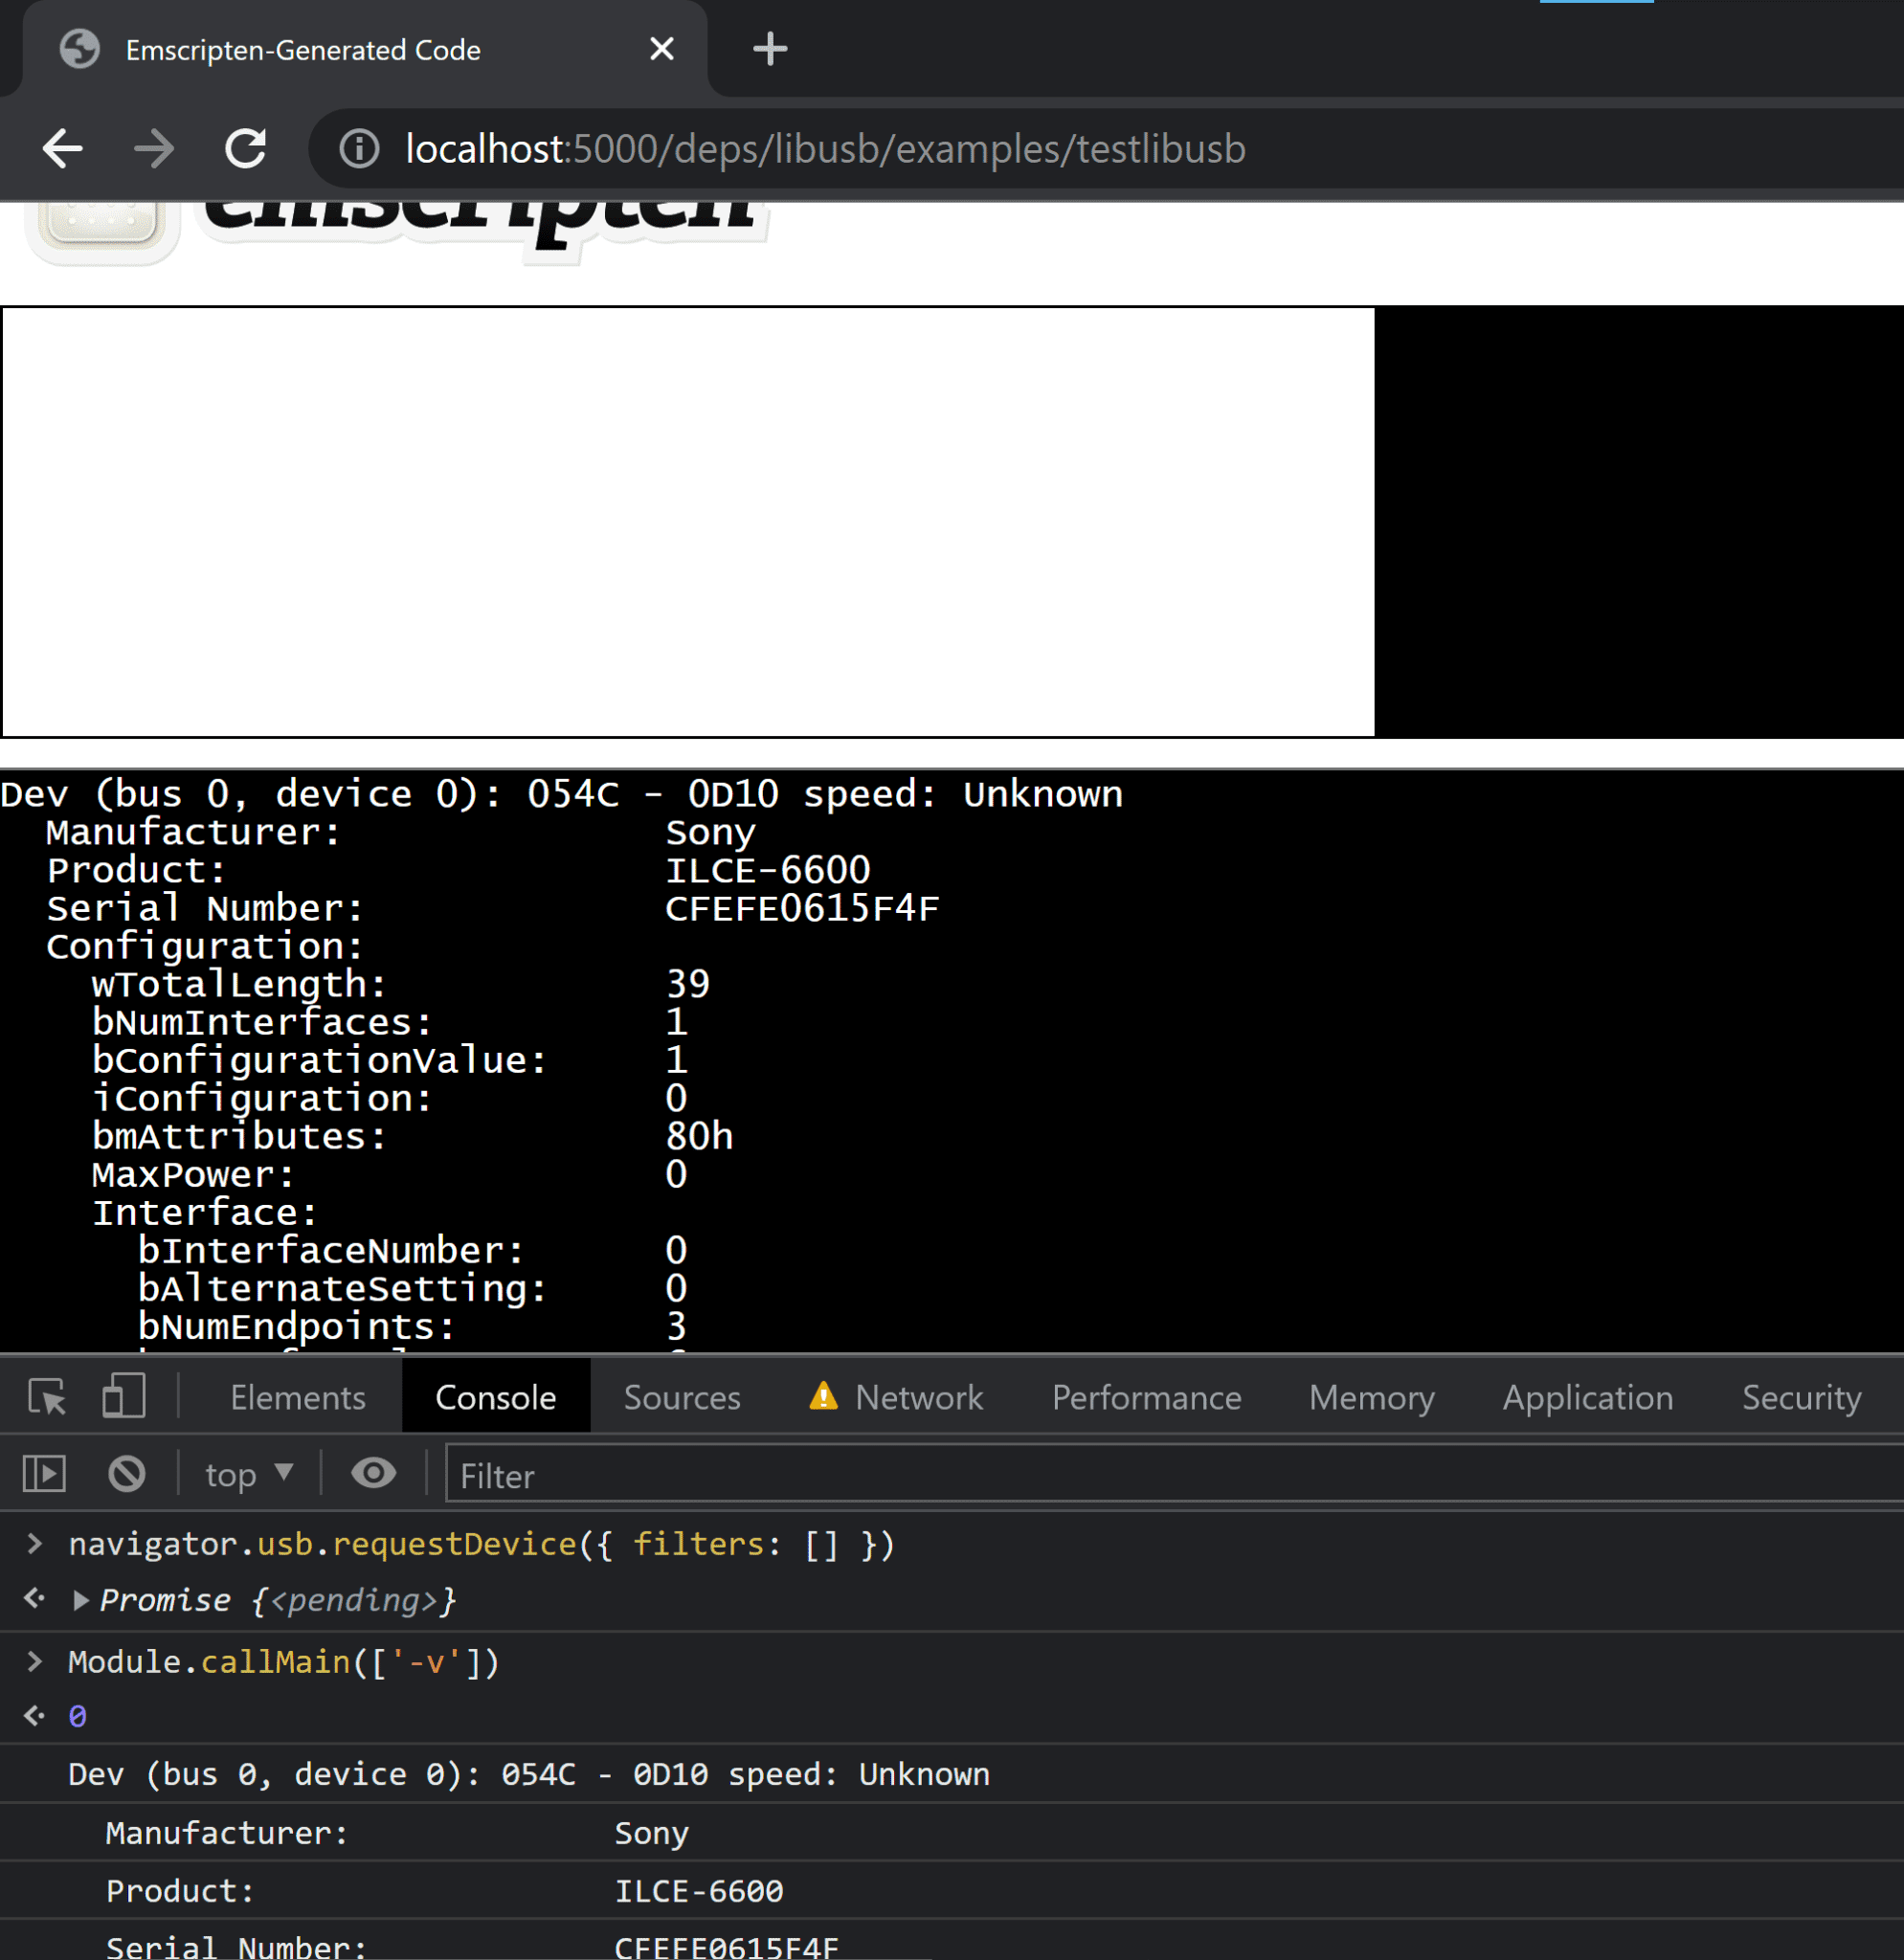 Screenshot of the next step, with DevTools still open. After the device was selected, Console has evaluated a new expression `Module.callMain(['-v'])`, which executed the `testlibusb` app in verbose mode. The output shows various detailed information about the previously connected USB camera: manufacturer Sony, product ILCE-6600, serial number, configuration etc.